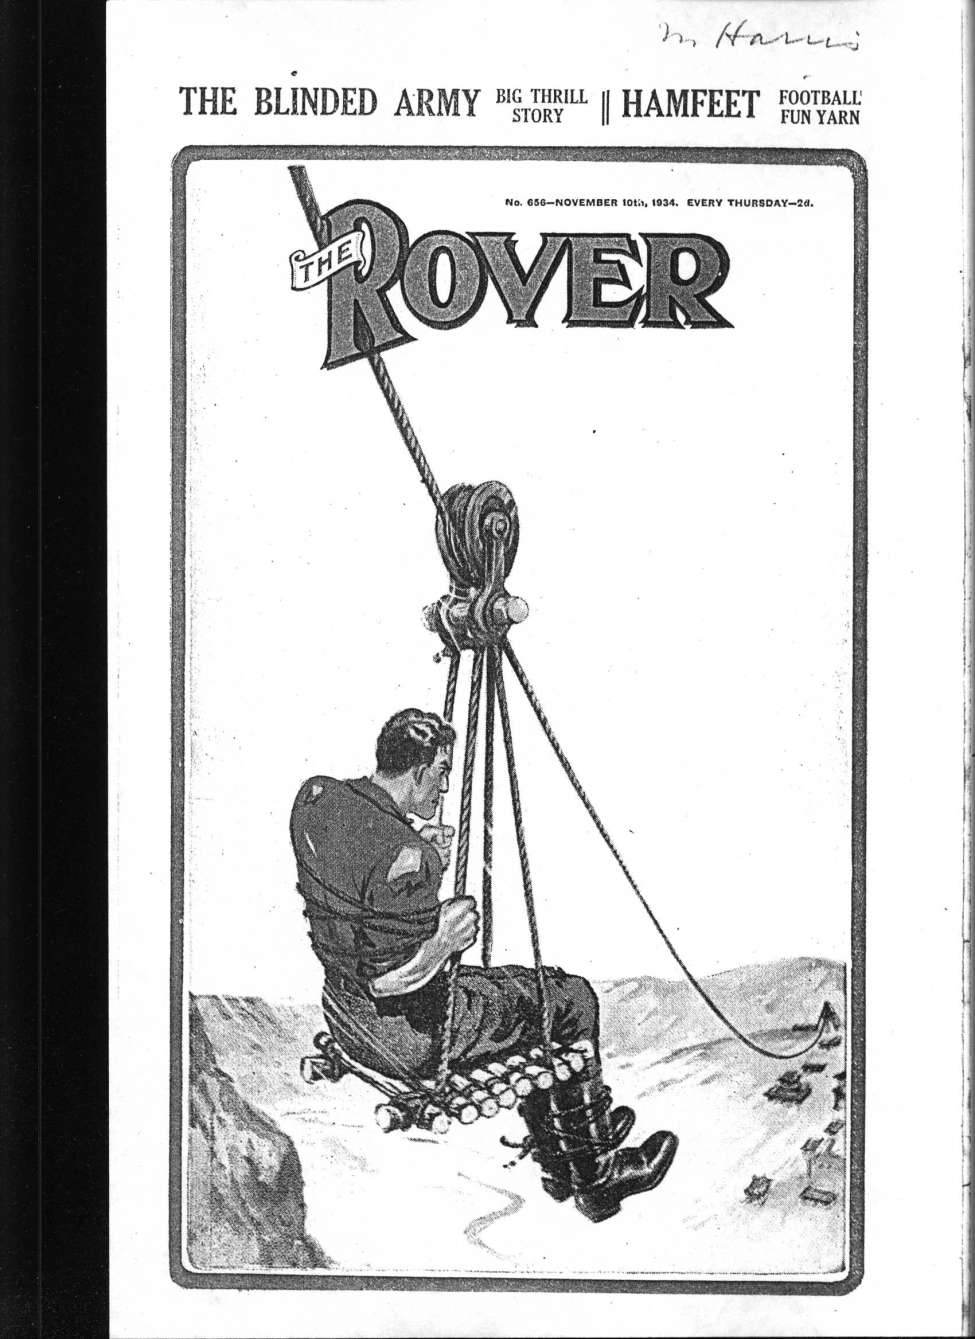 Book Cover For The Rover 656